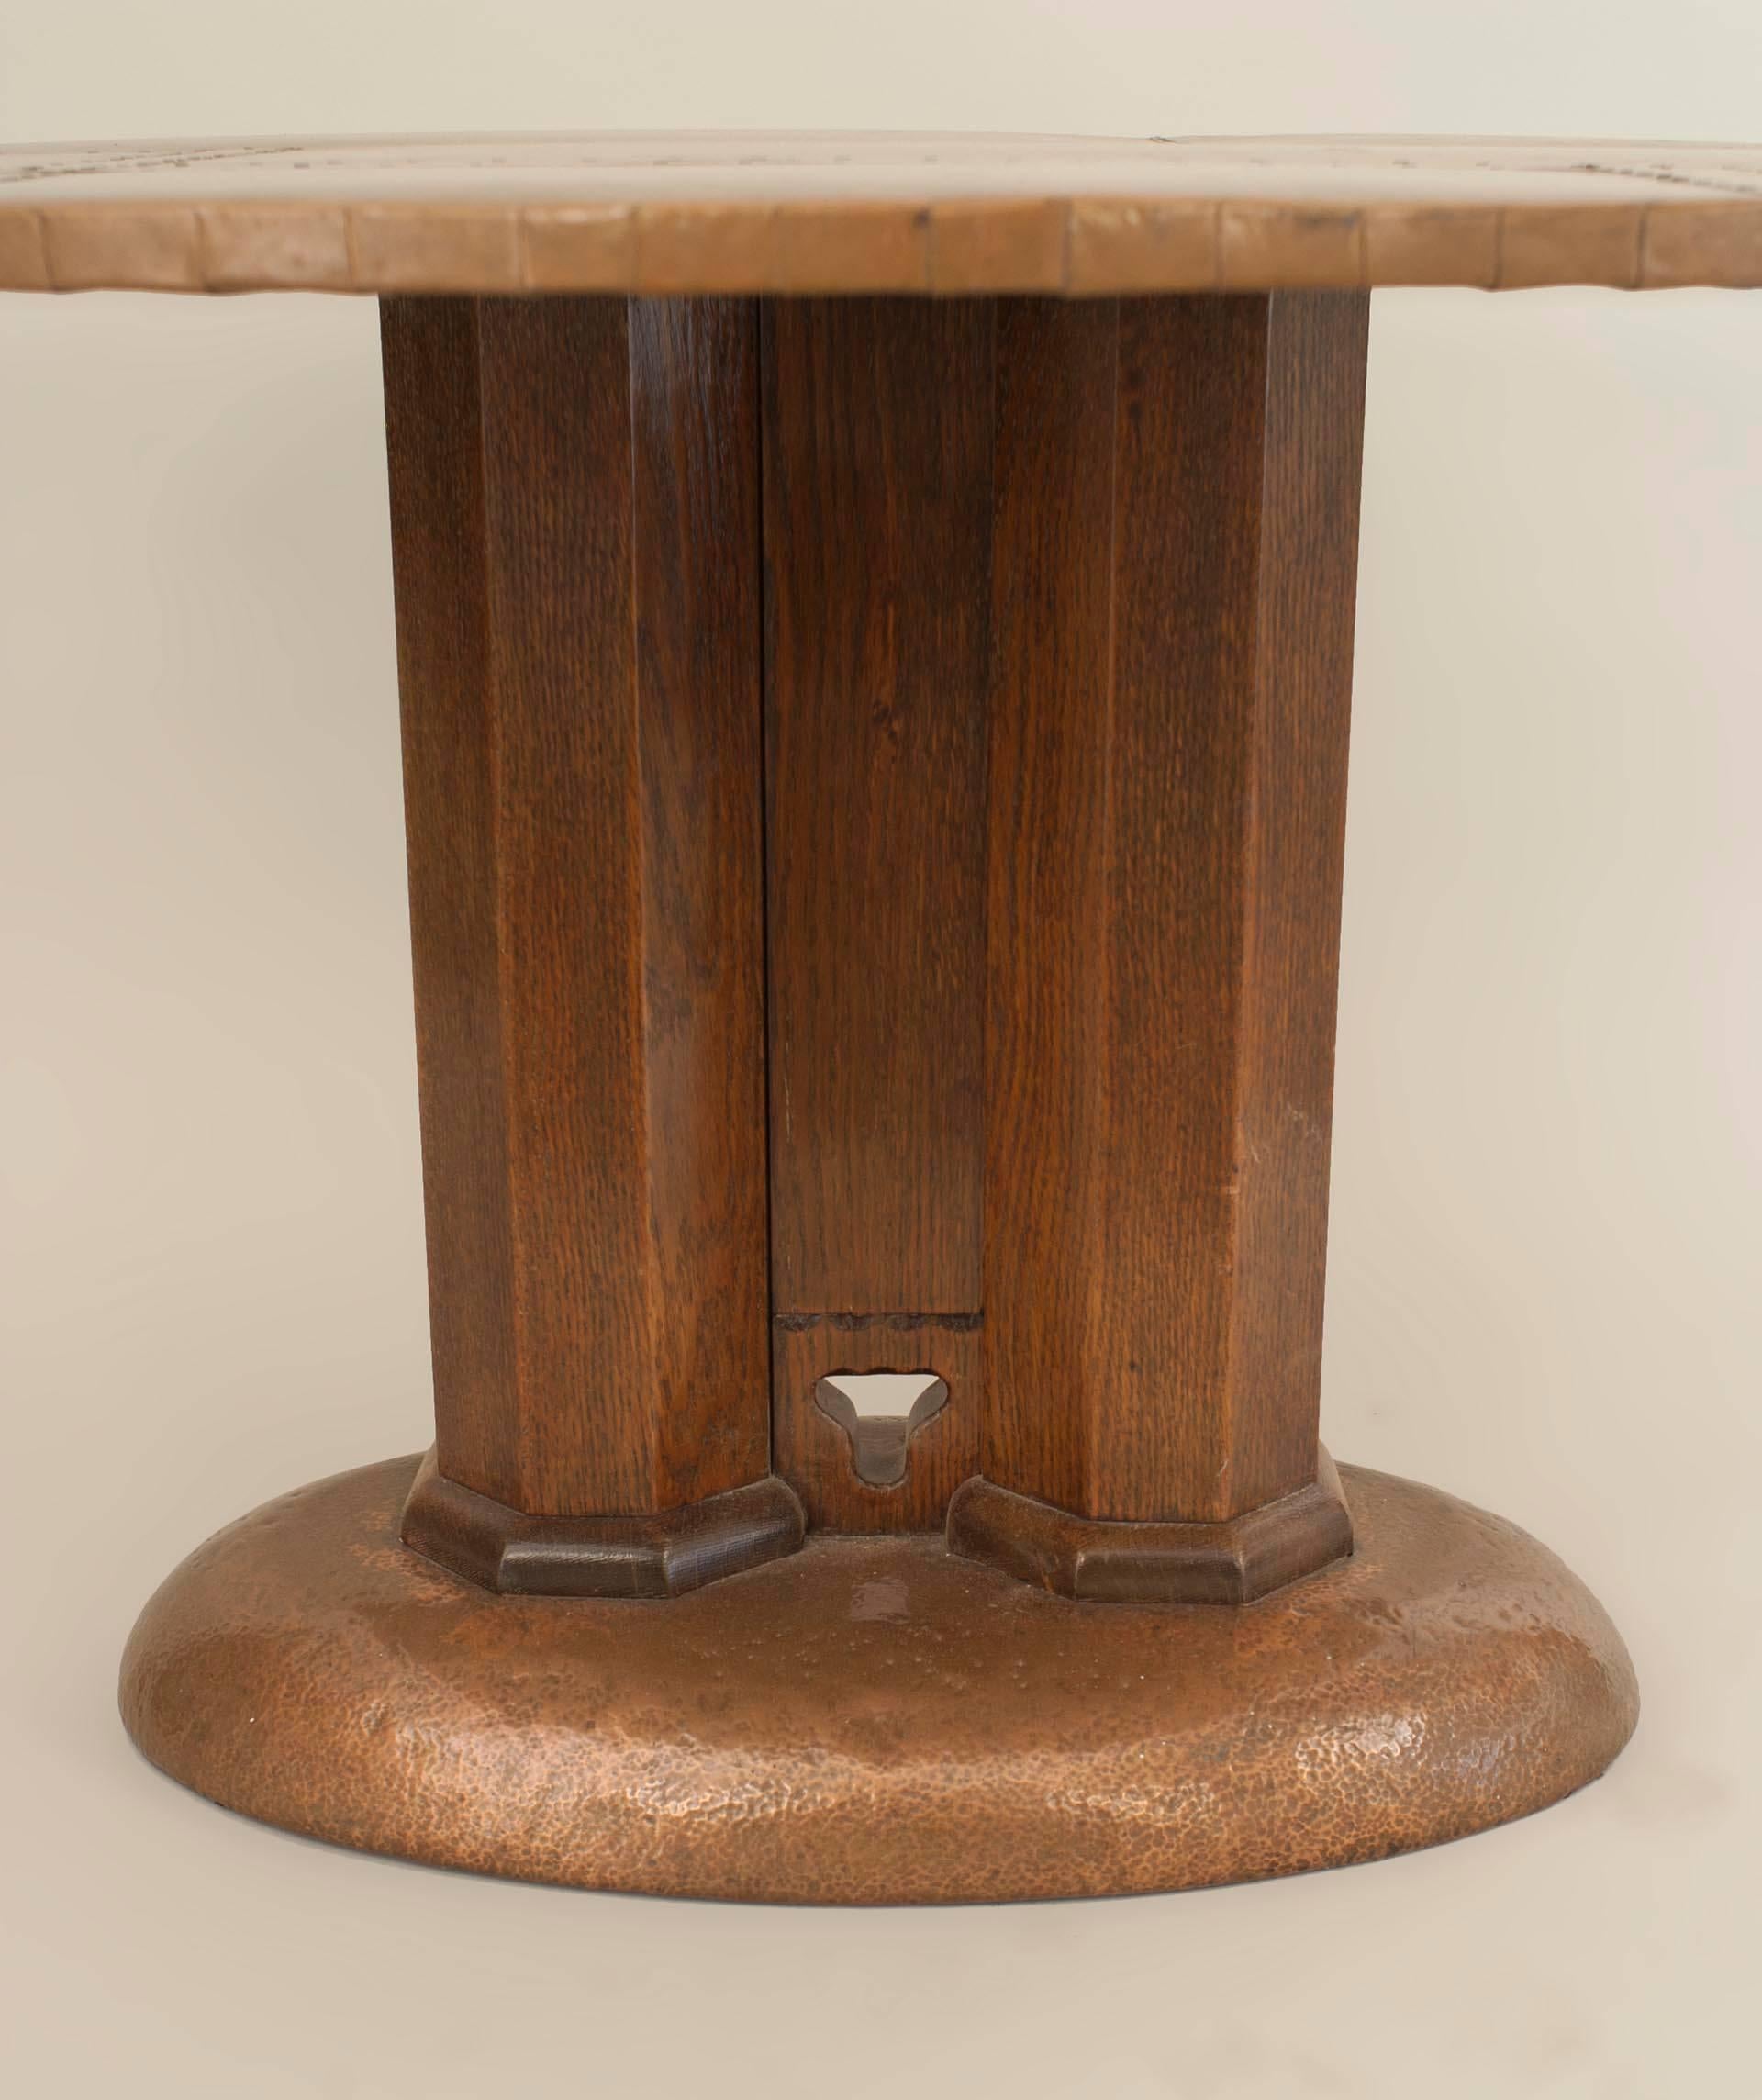 18th Century English Arts and Crafts Center Table with a Round Copper Top